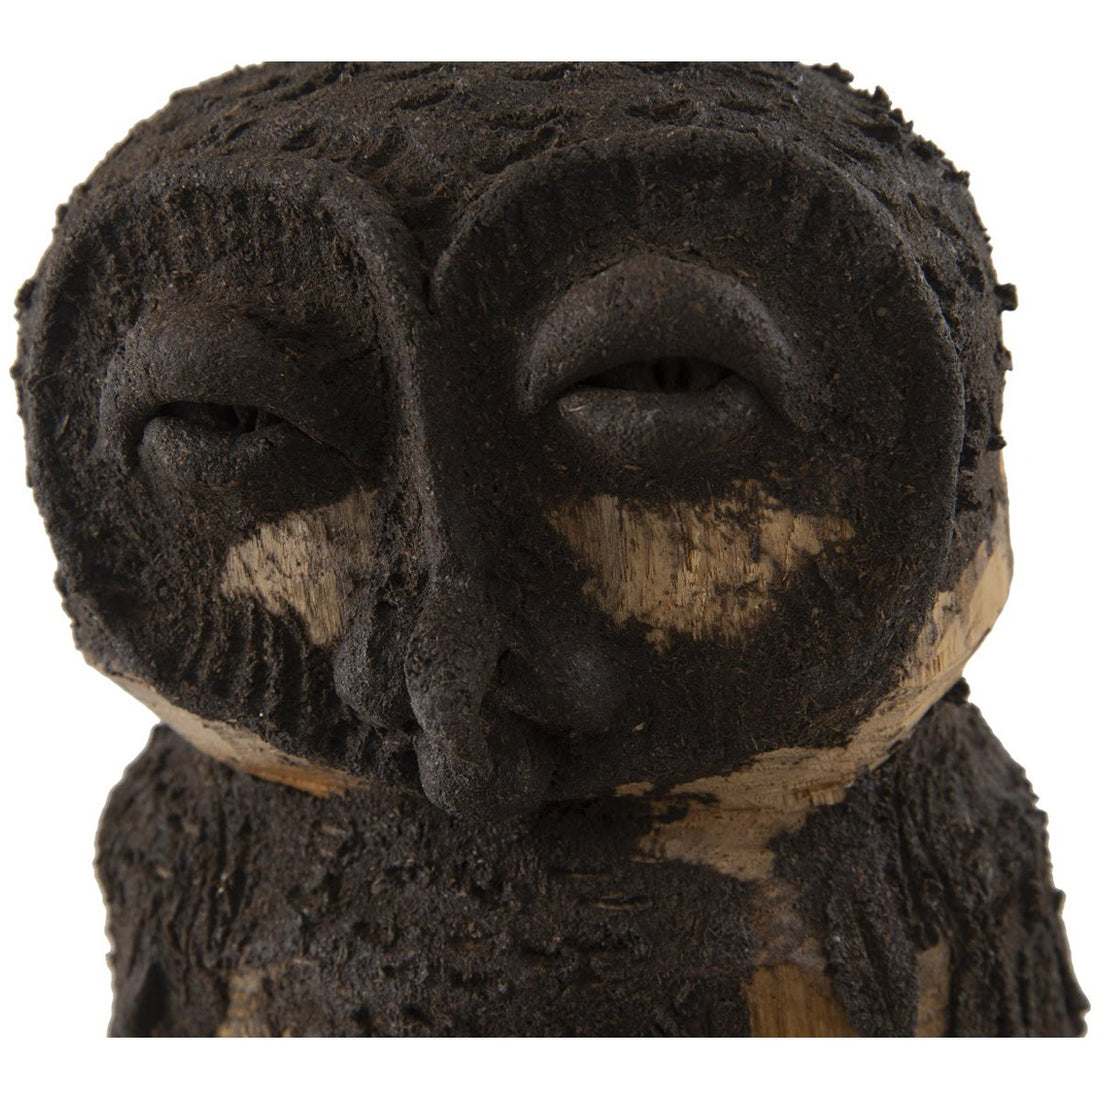 Phillips Collection Carved Girl Owl Sculpture